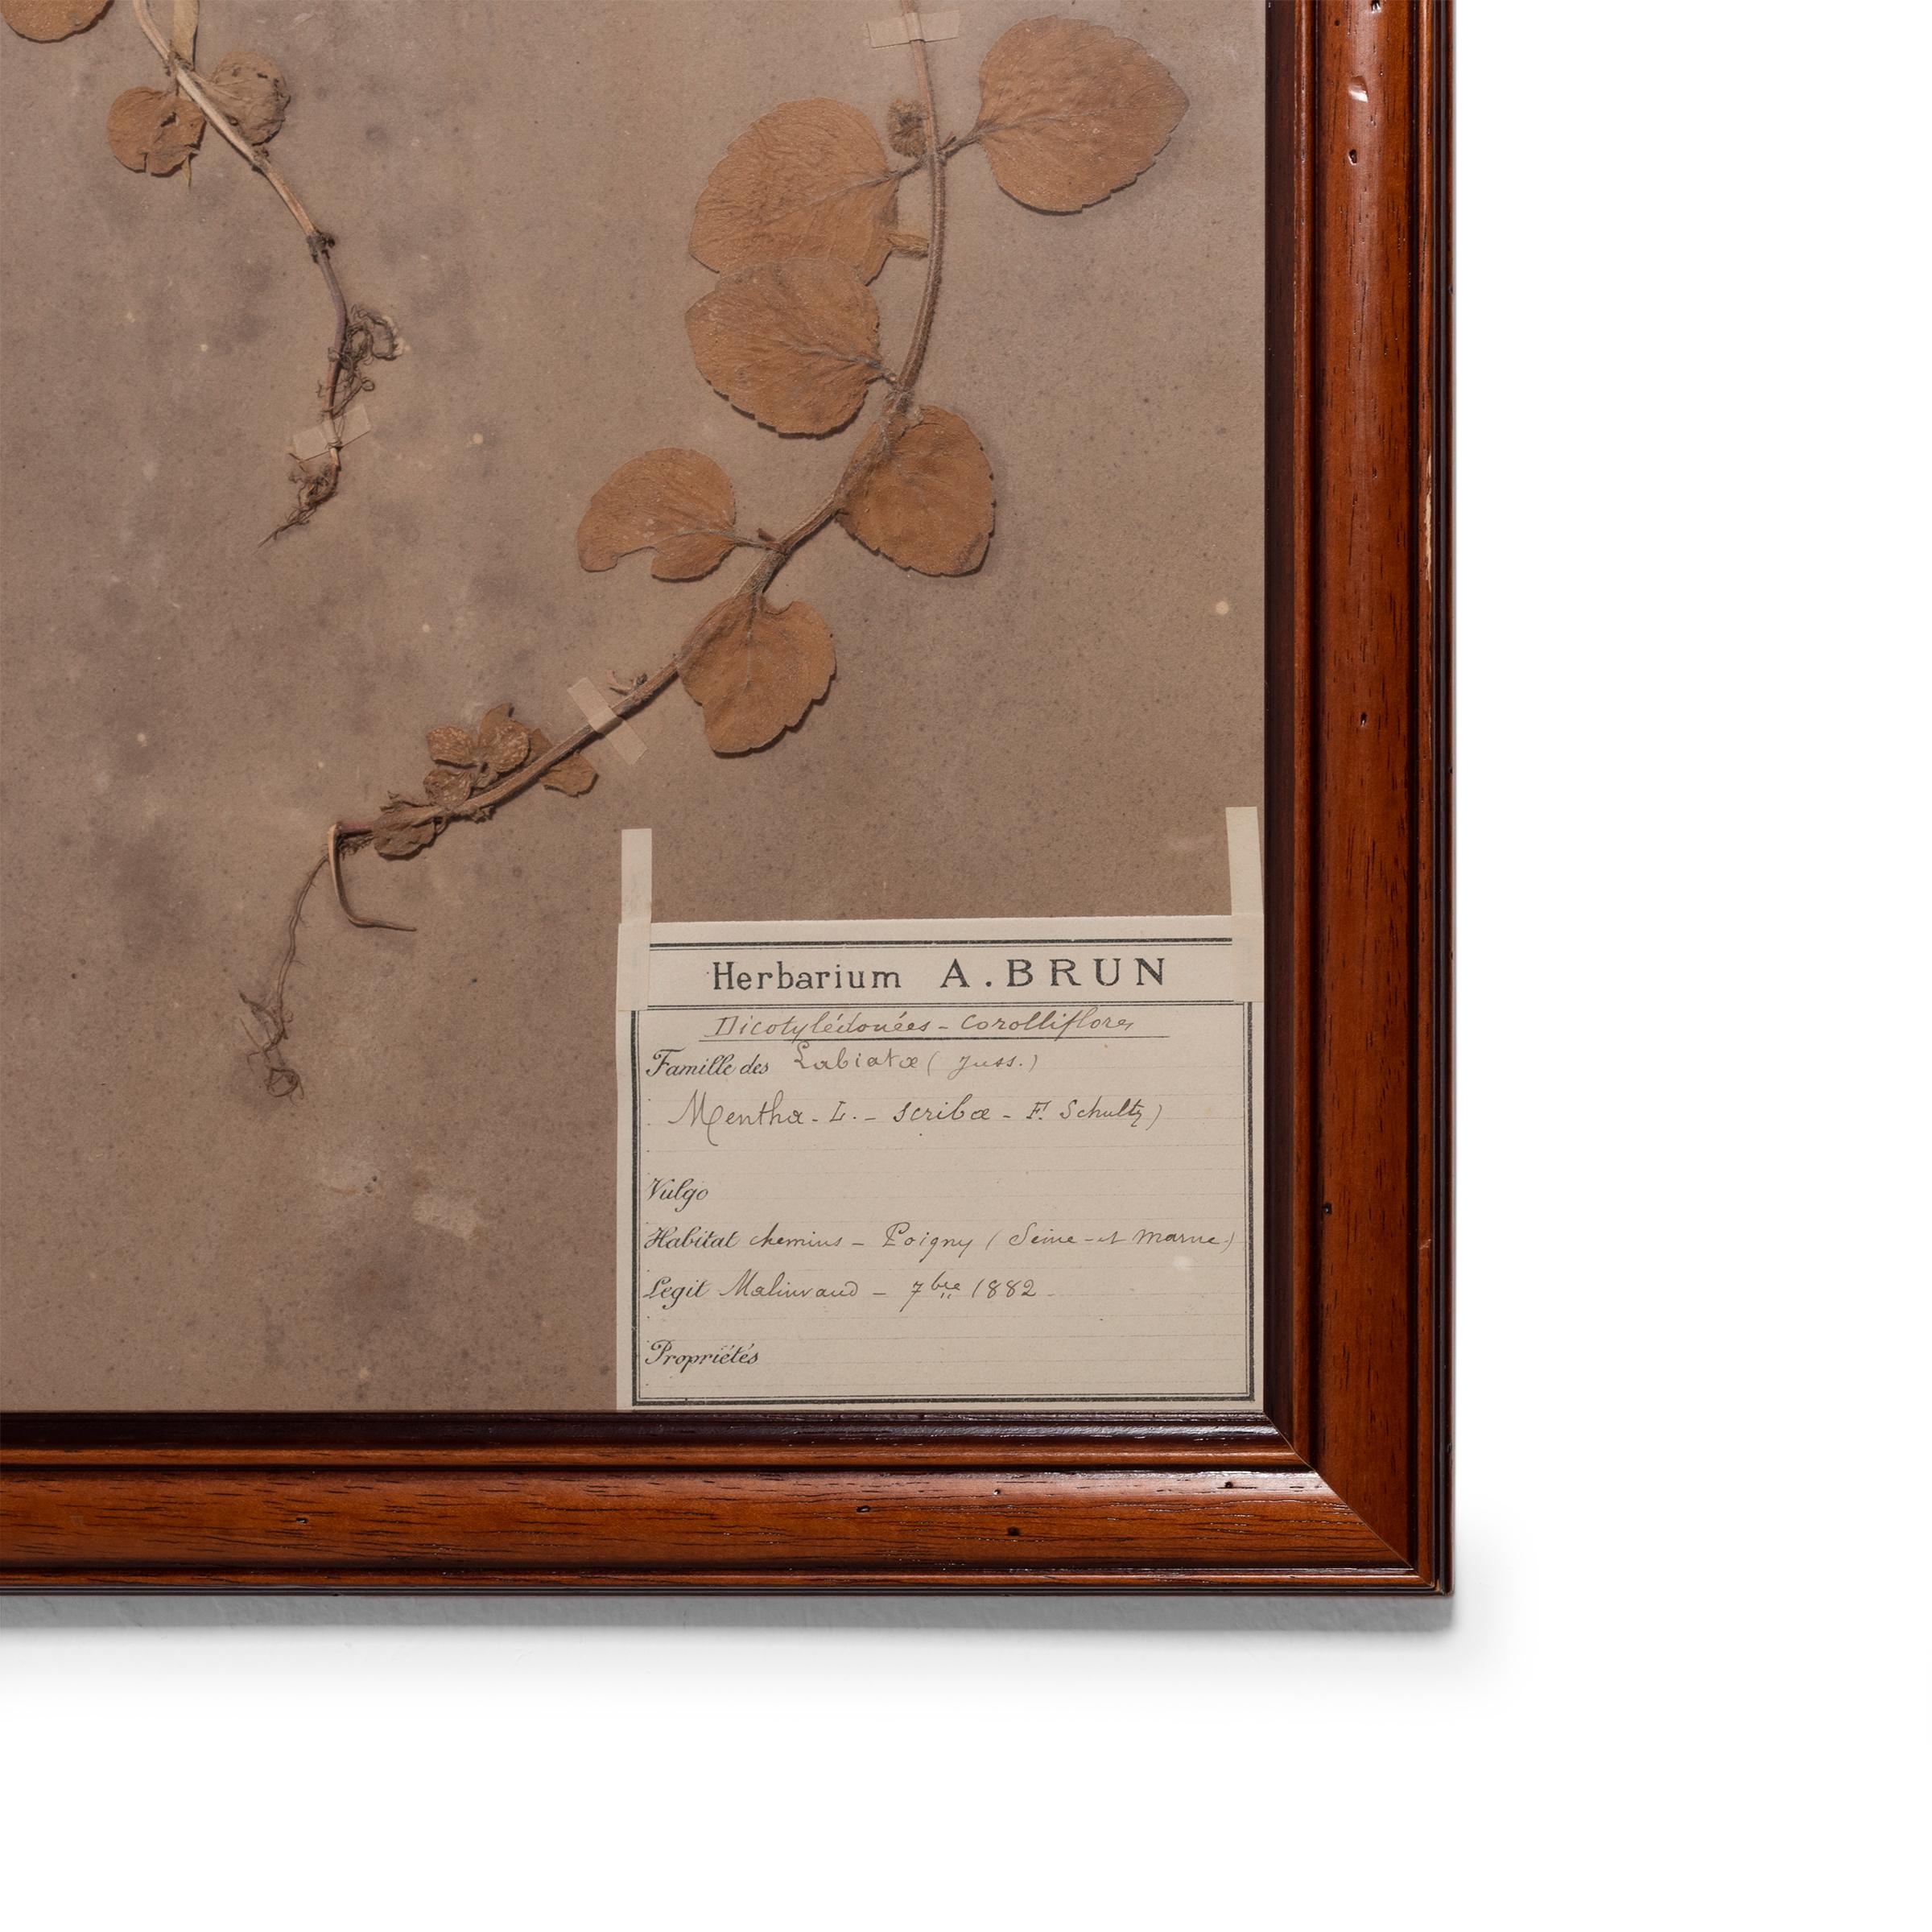 These four botanical specimens from the herbarium of A. Brun were hand-picked, pressed and preserved in the late-19th century. Each plant specimen is elegantly presented within a fine hardwood frame and includes a hand-written taxonomy card with the